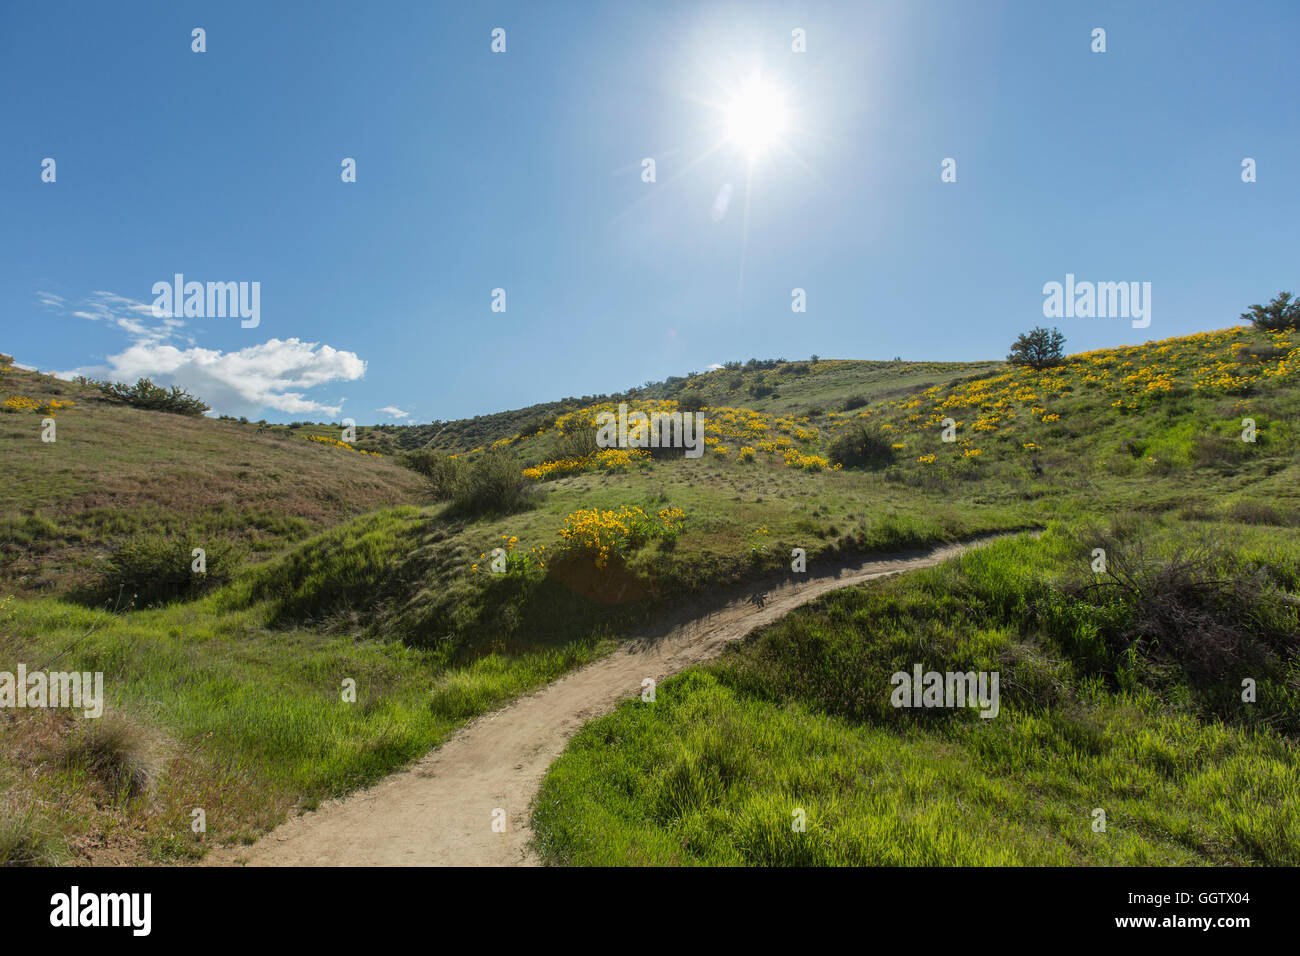 Dirt path in rolling landscape Stock Photo